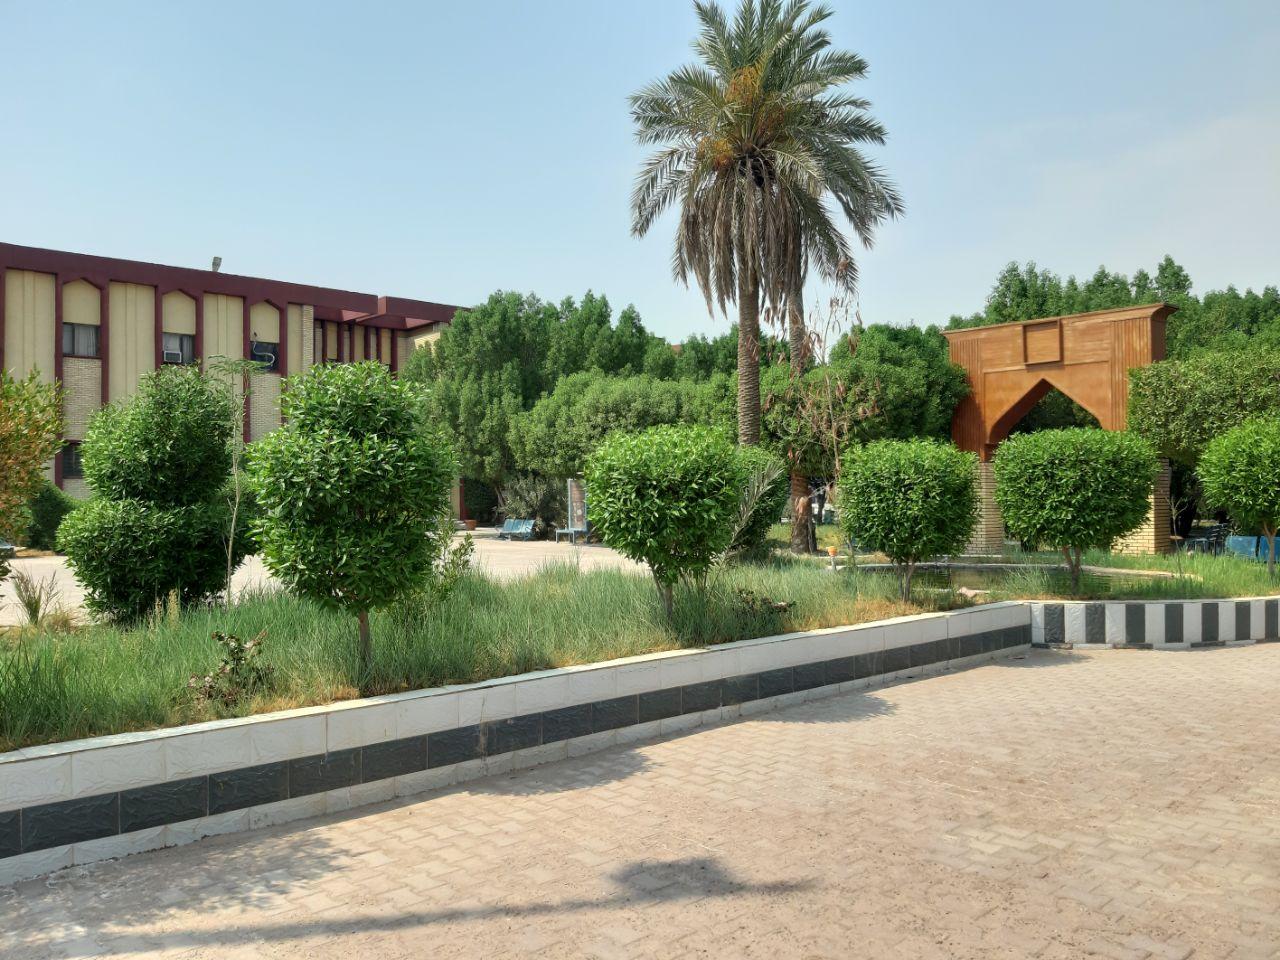 University of Basra College of Education for Human Sciences